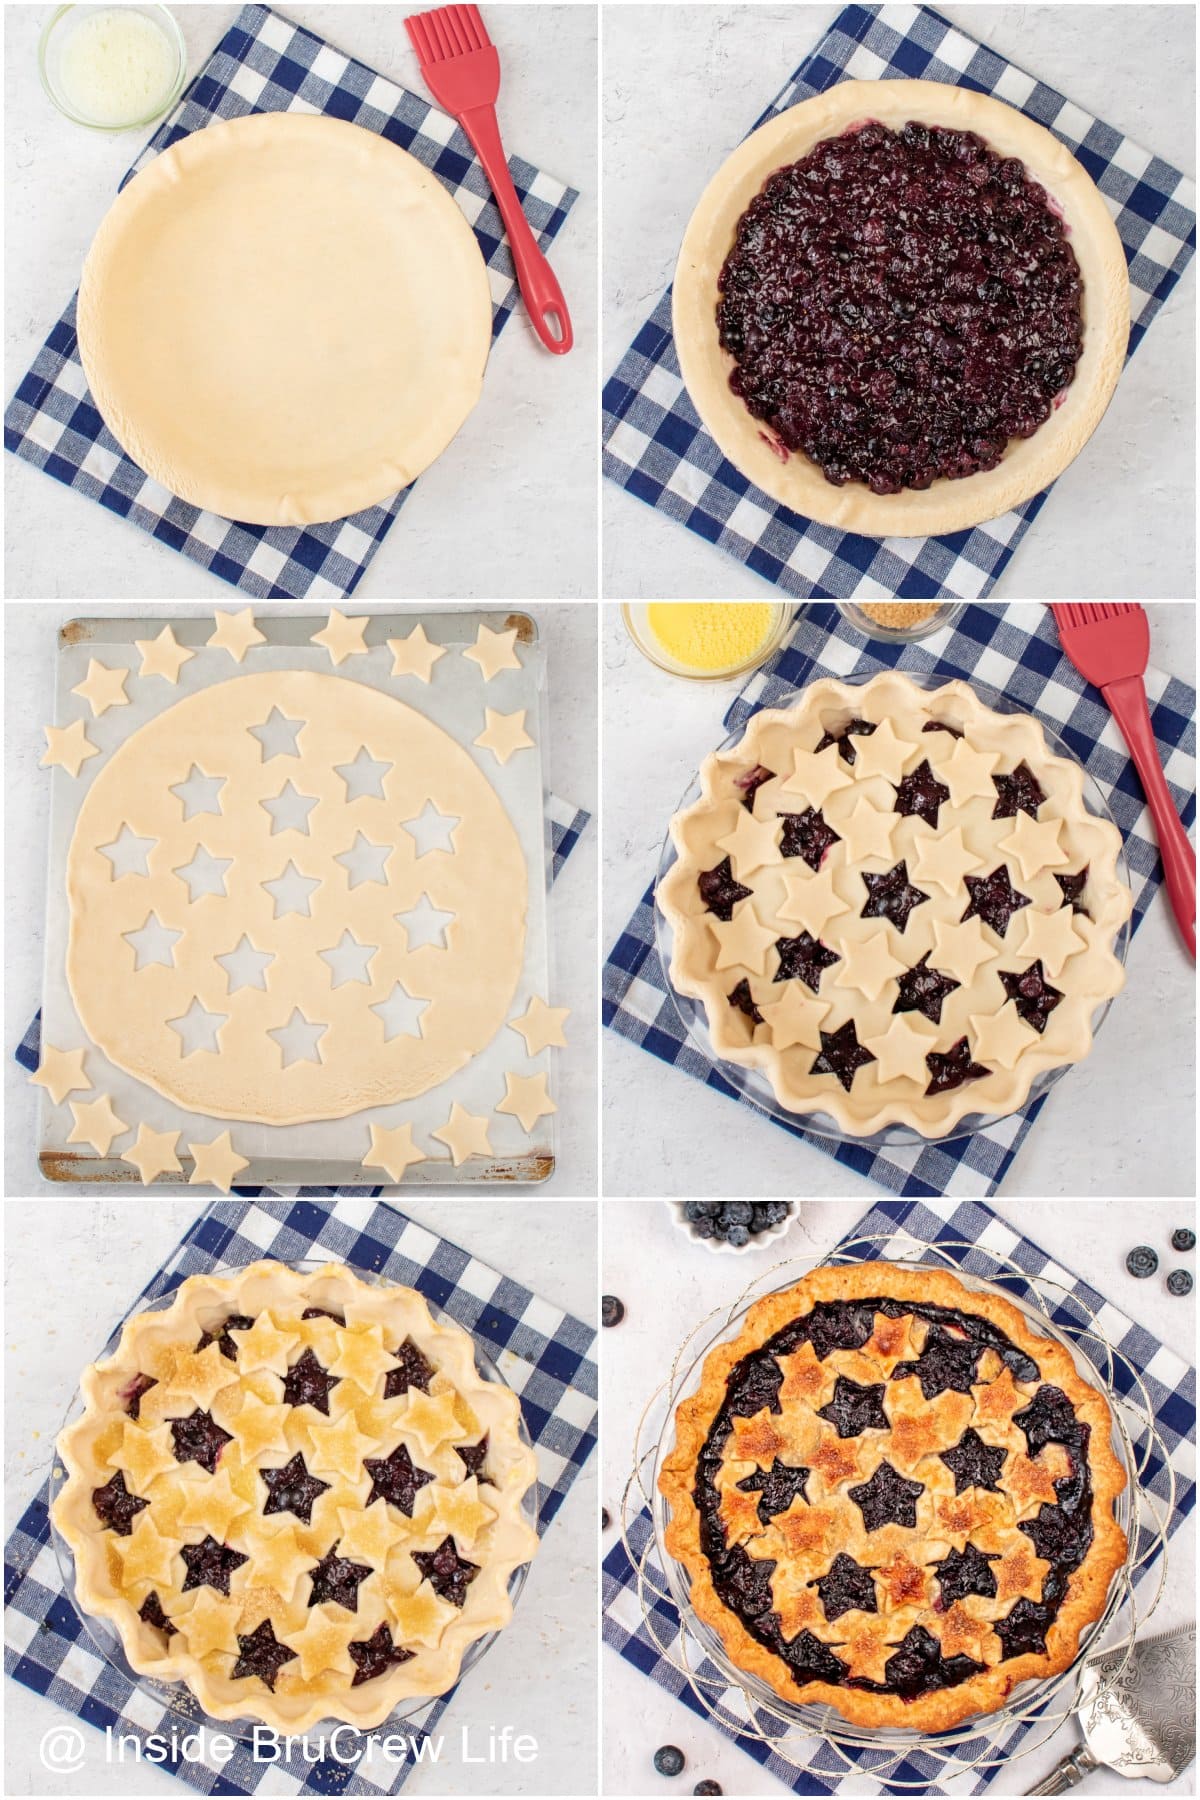 Six pictures collaged together showing how to put a cut out crust on a pie.